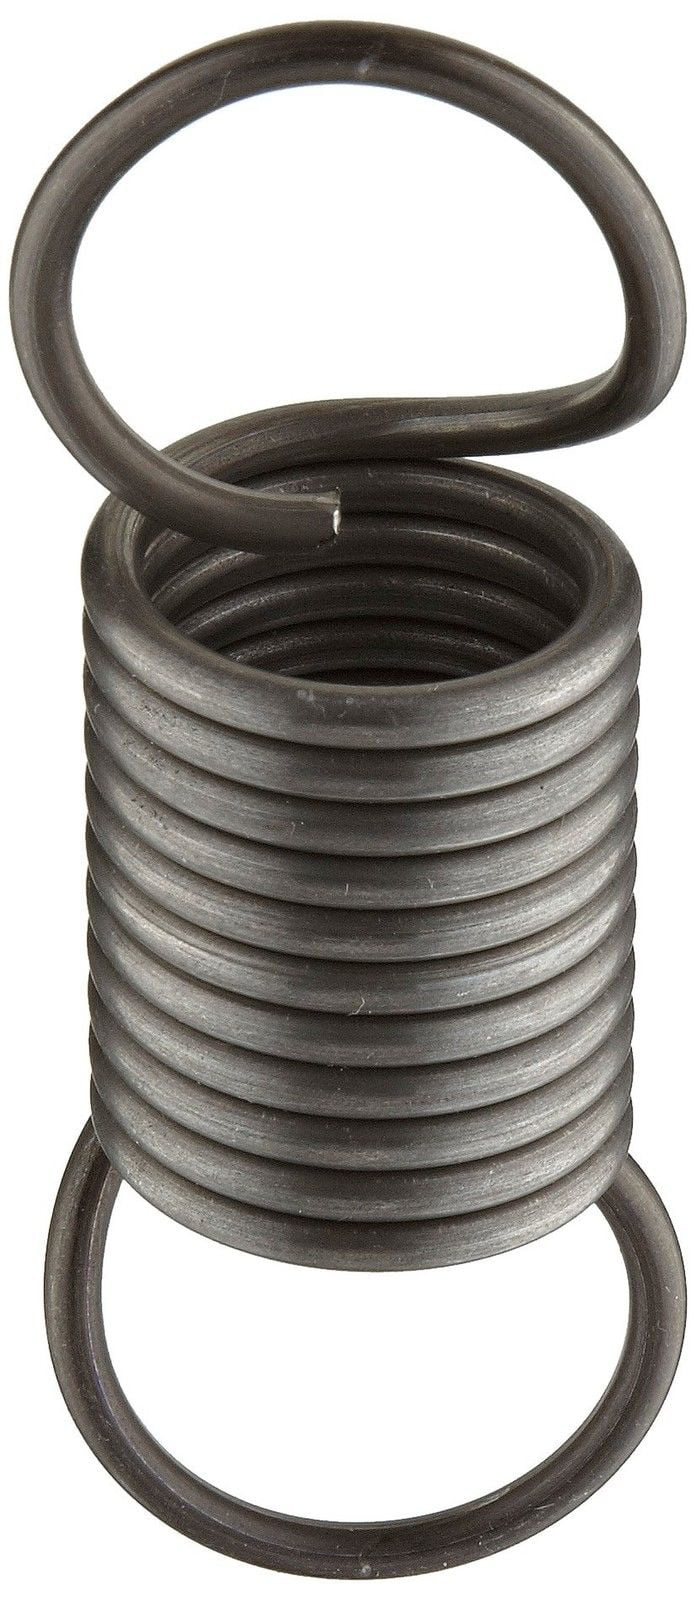 Steel 46.64 lbs Load Capacity 3.6 lbs/in Spring Rate 19.13 Extended Length 0.125 Wire Size 1.5 OD Music Wire Extension Spring Pack of 10 Inch 7.5 Free Length 